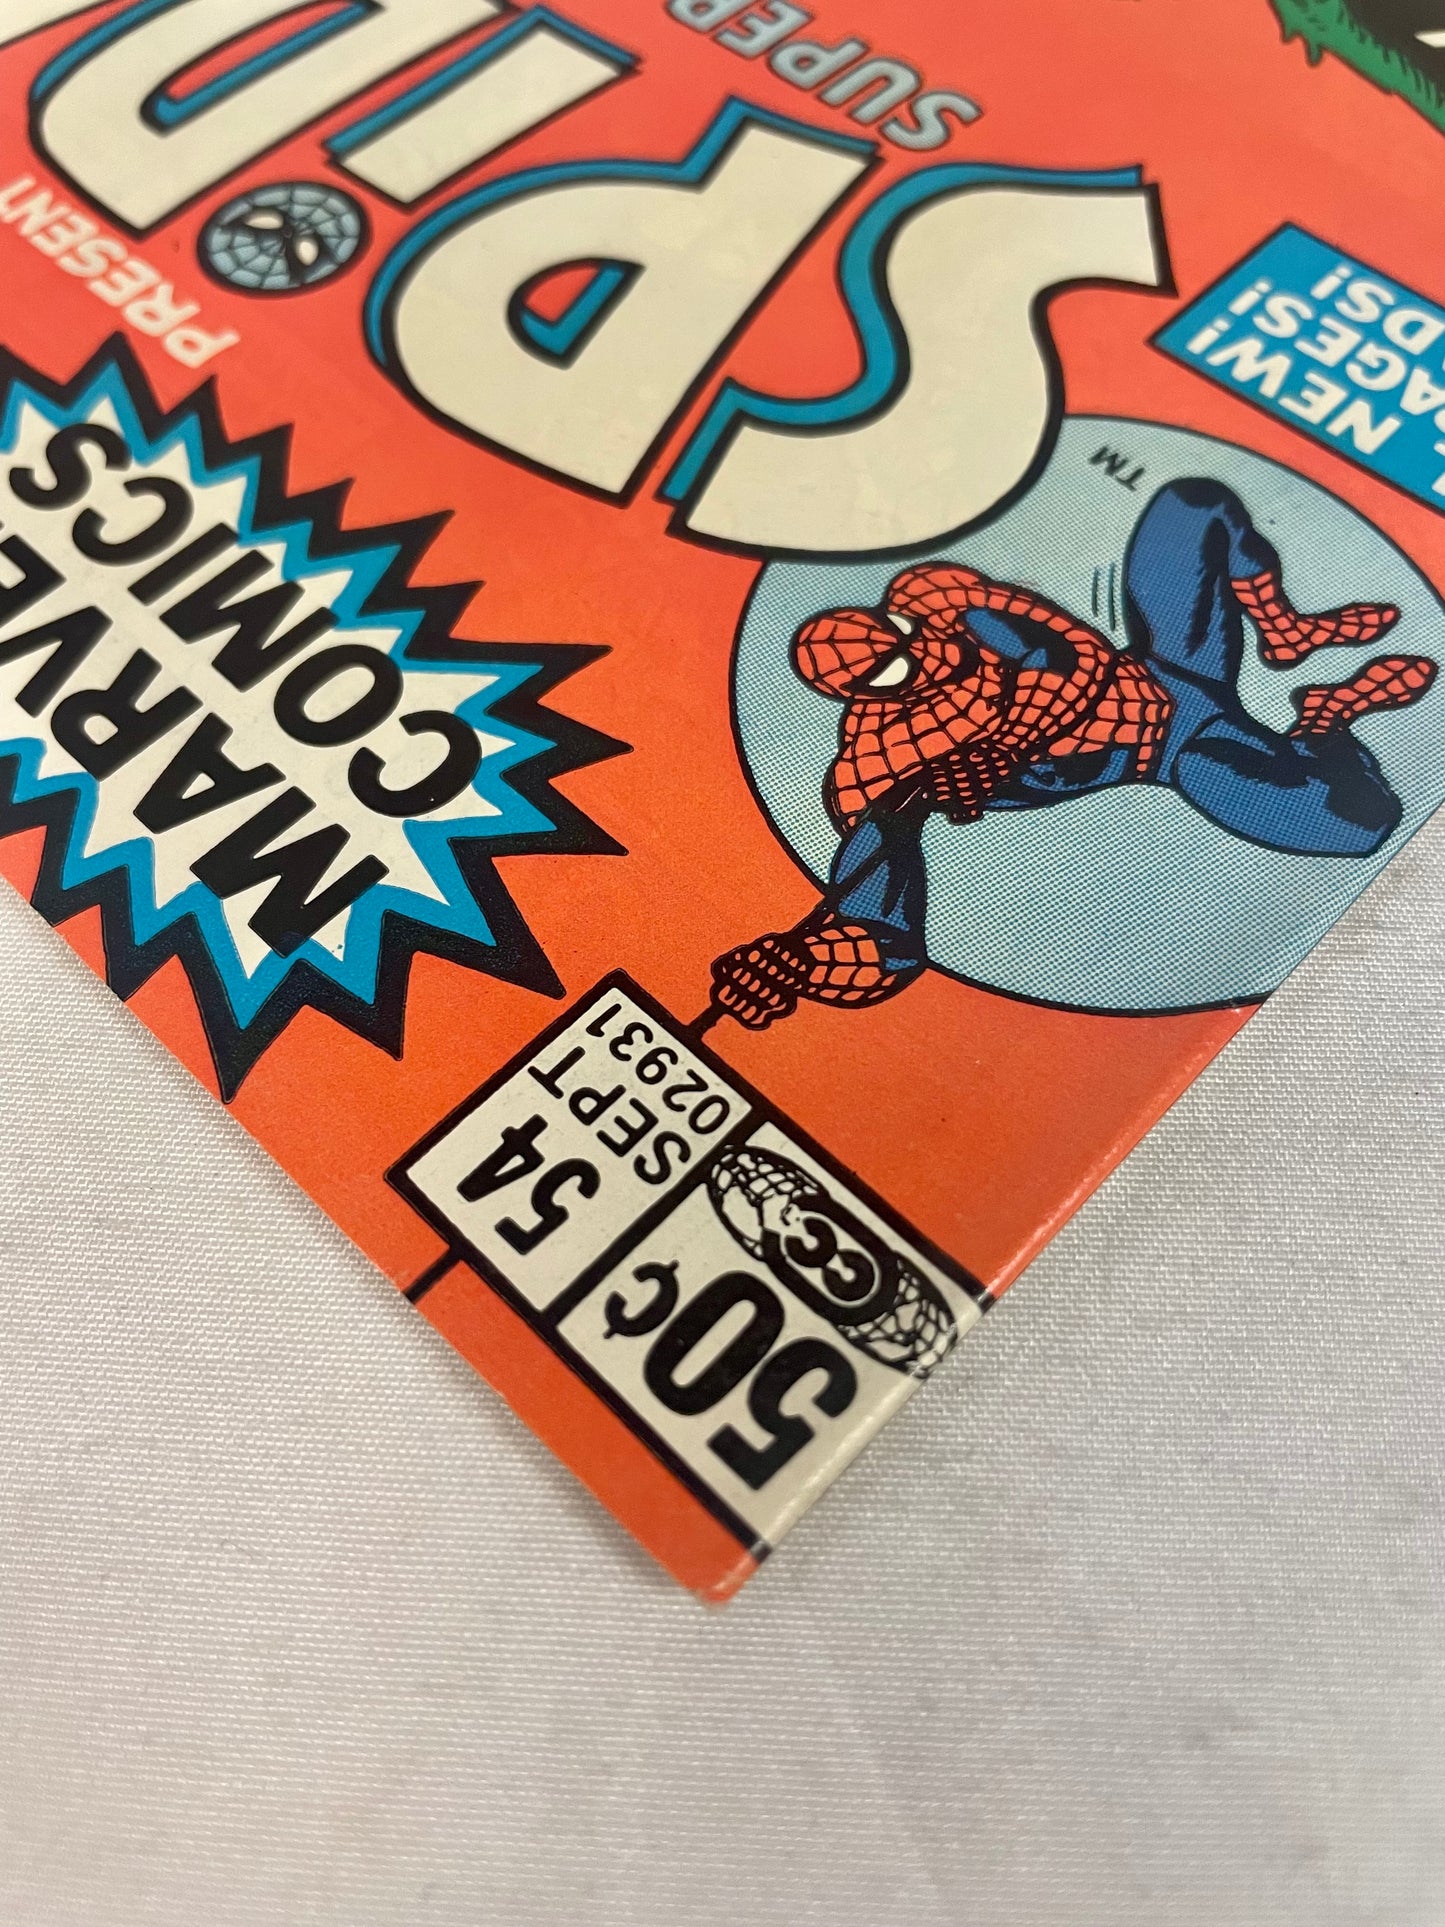 Marvel Comics And The Electric Company Presents Spidey Super Stories #54